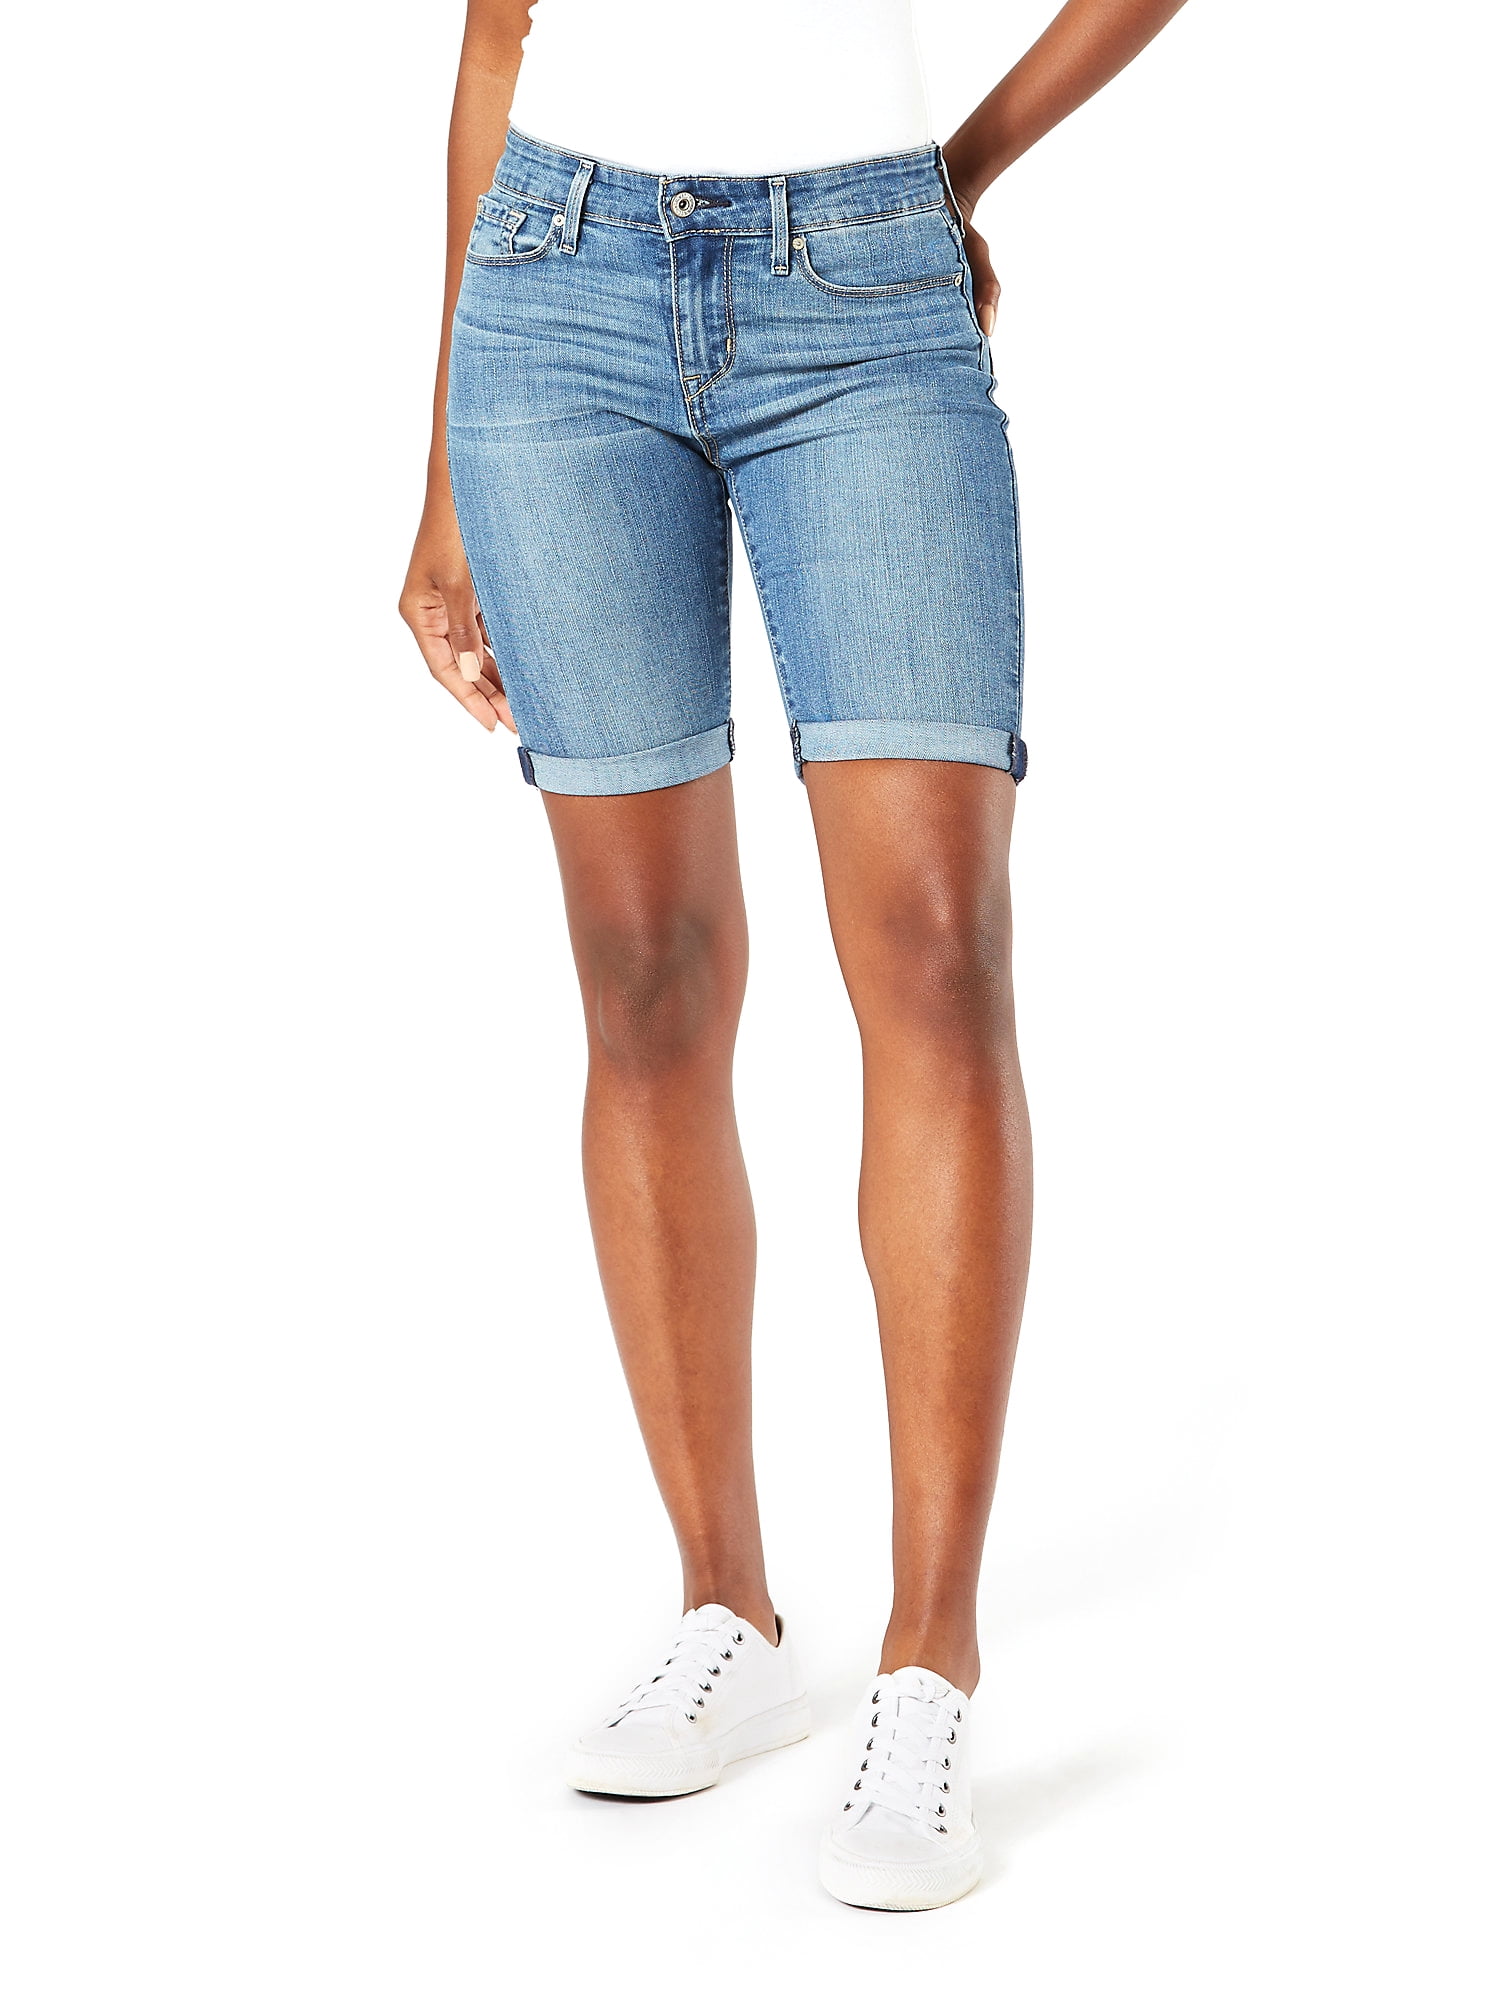 signature by levi strauss & co shorts